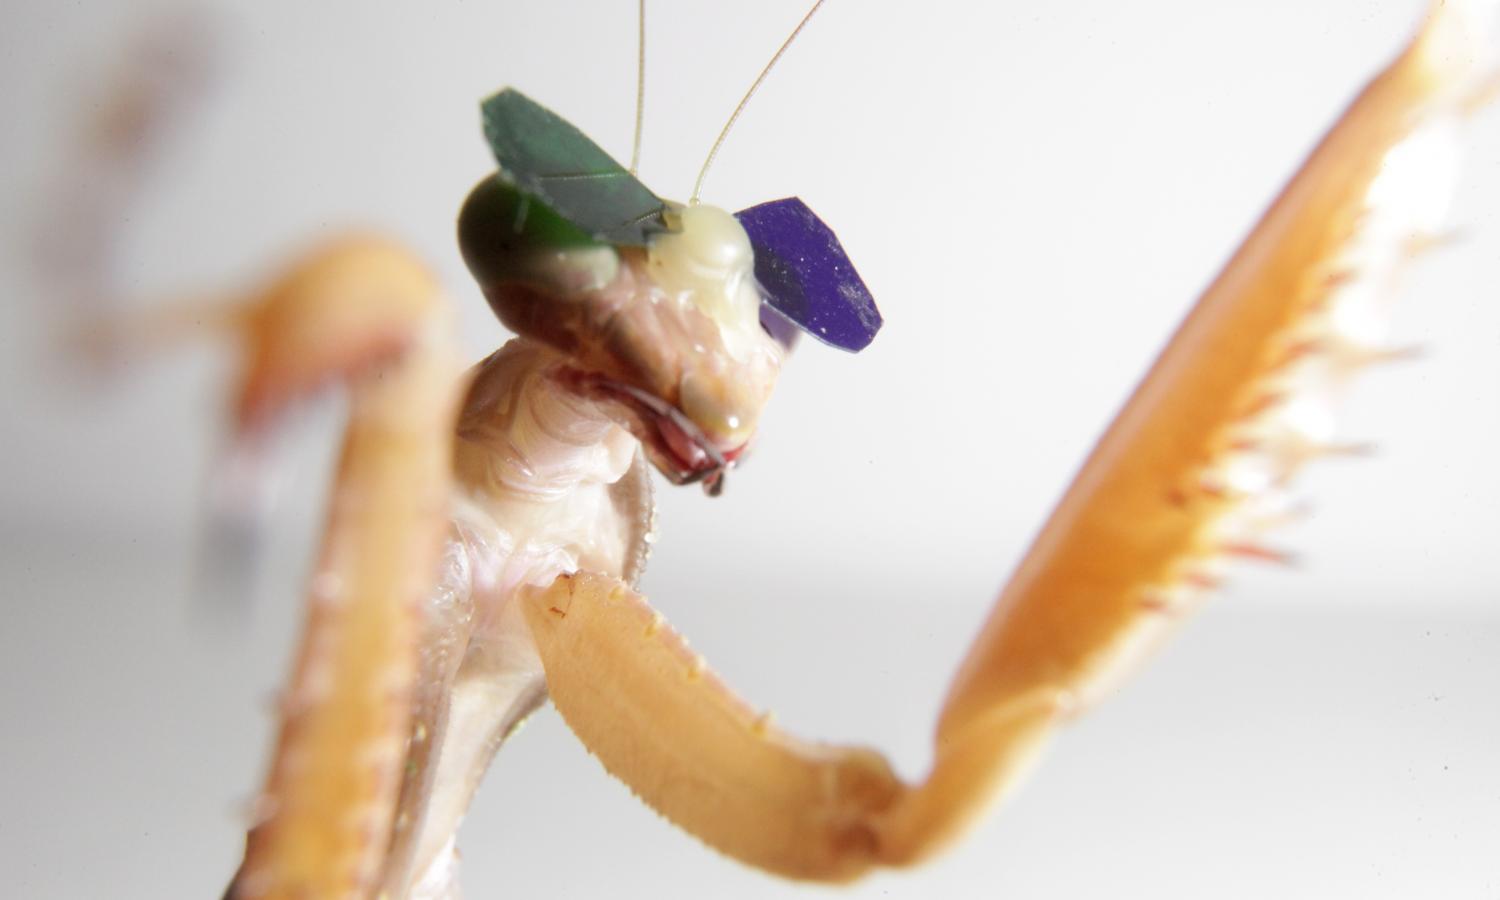 Scientists from Newcastle University <a href="https://www.popsci.com/praying-mantises-wearing-3d-glasses-prove-that-they-can-see-in-3d/">outfitted</a> praying mantises in miniature 3-D glasses attached with beeswax in an effort to determine whether mantises use 3D vision. They <a href="http://www.nature.com/articles/srep18718#results/">concluded</a> that the insects likely make use of 3-D vision when they hunt.